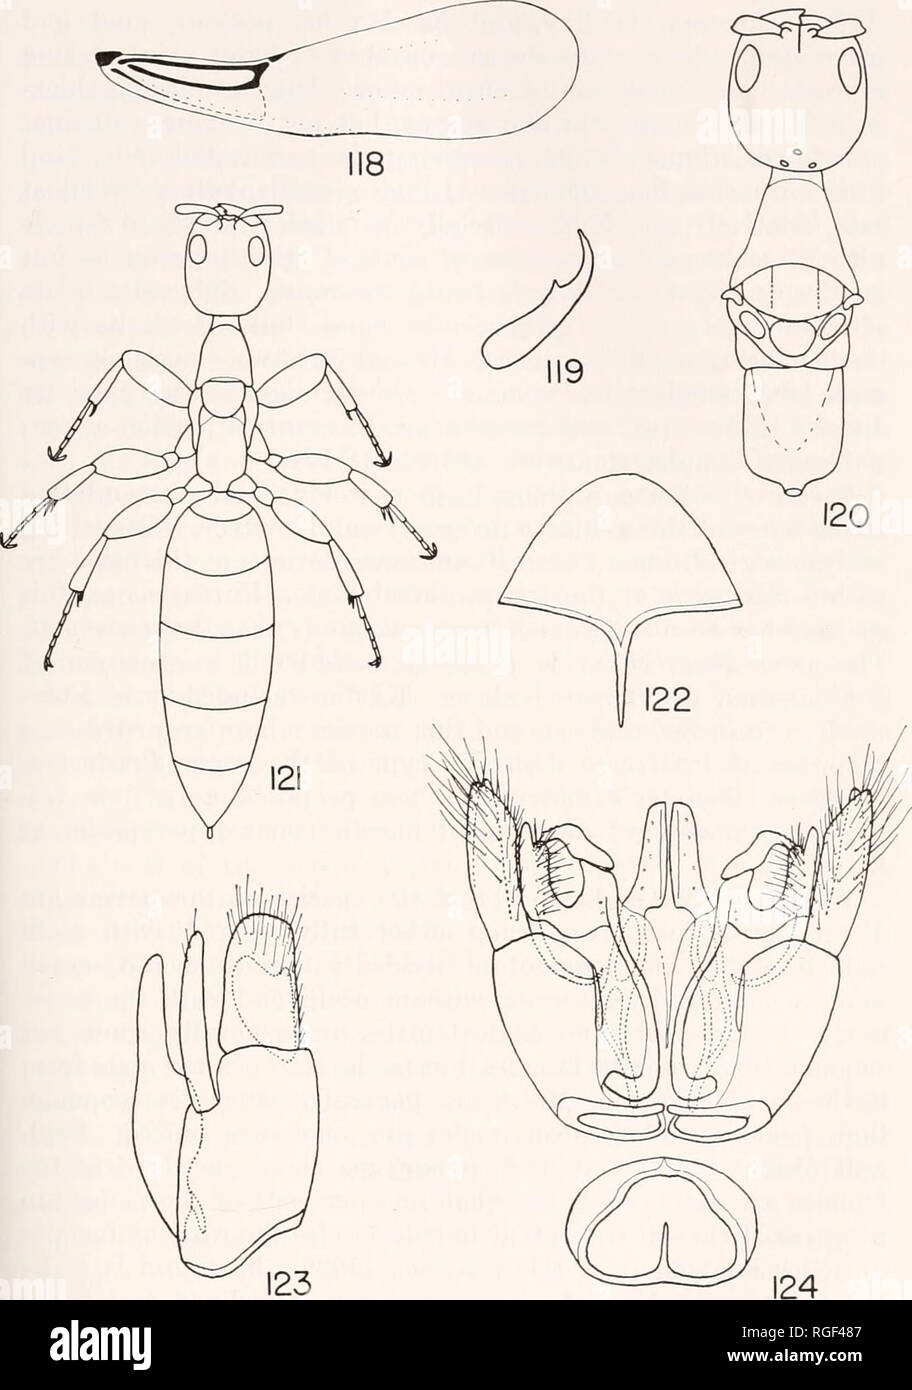 . Bulletin of the Museum of Comparative Zoology at Harvard College. Zoology. EVANS: AMERICAN BETHYLIDAE 175. Scleroderma macrogaster (Ashmead). Fig. 118. Fore wing of alate female. Fig. 119. Hind tarsal claw of alate female. Fig. 120. Head and thorax of alate female. Fig. 121. Apterous female. Fig. 122. Male sub- genital plate. Fig. 123. Male genitalia, lateral aspect, dorsal surface (aedoeagus) at left. Fig. 124. Male genitalia, ventral aspect with basal ring detached from genital capsule.. Please note that these images are extracted from scanned page images that may have been digitally enhan Stock Photo